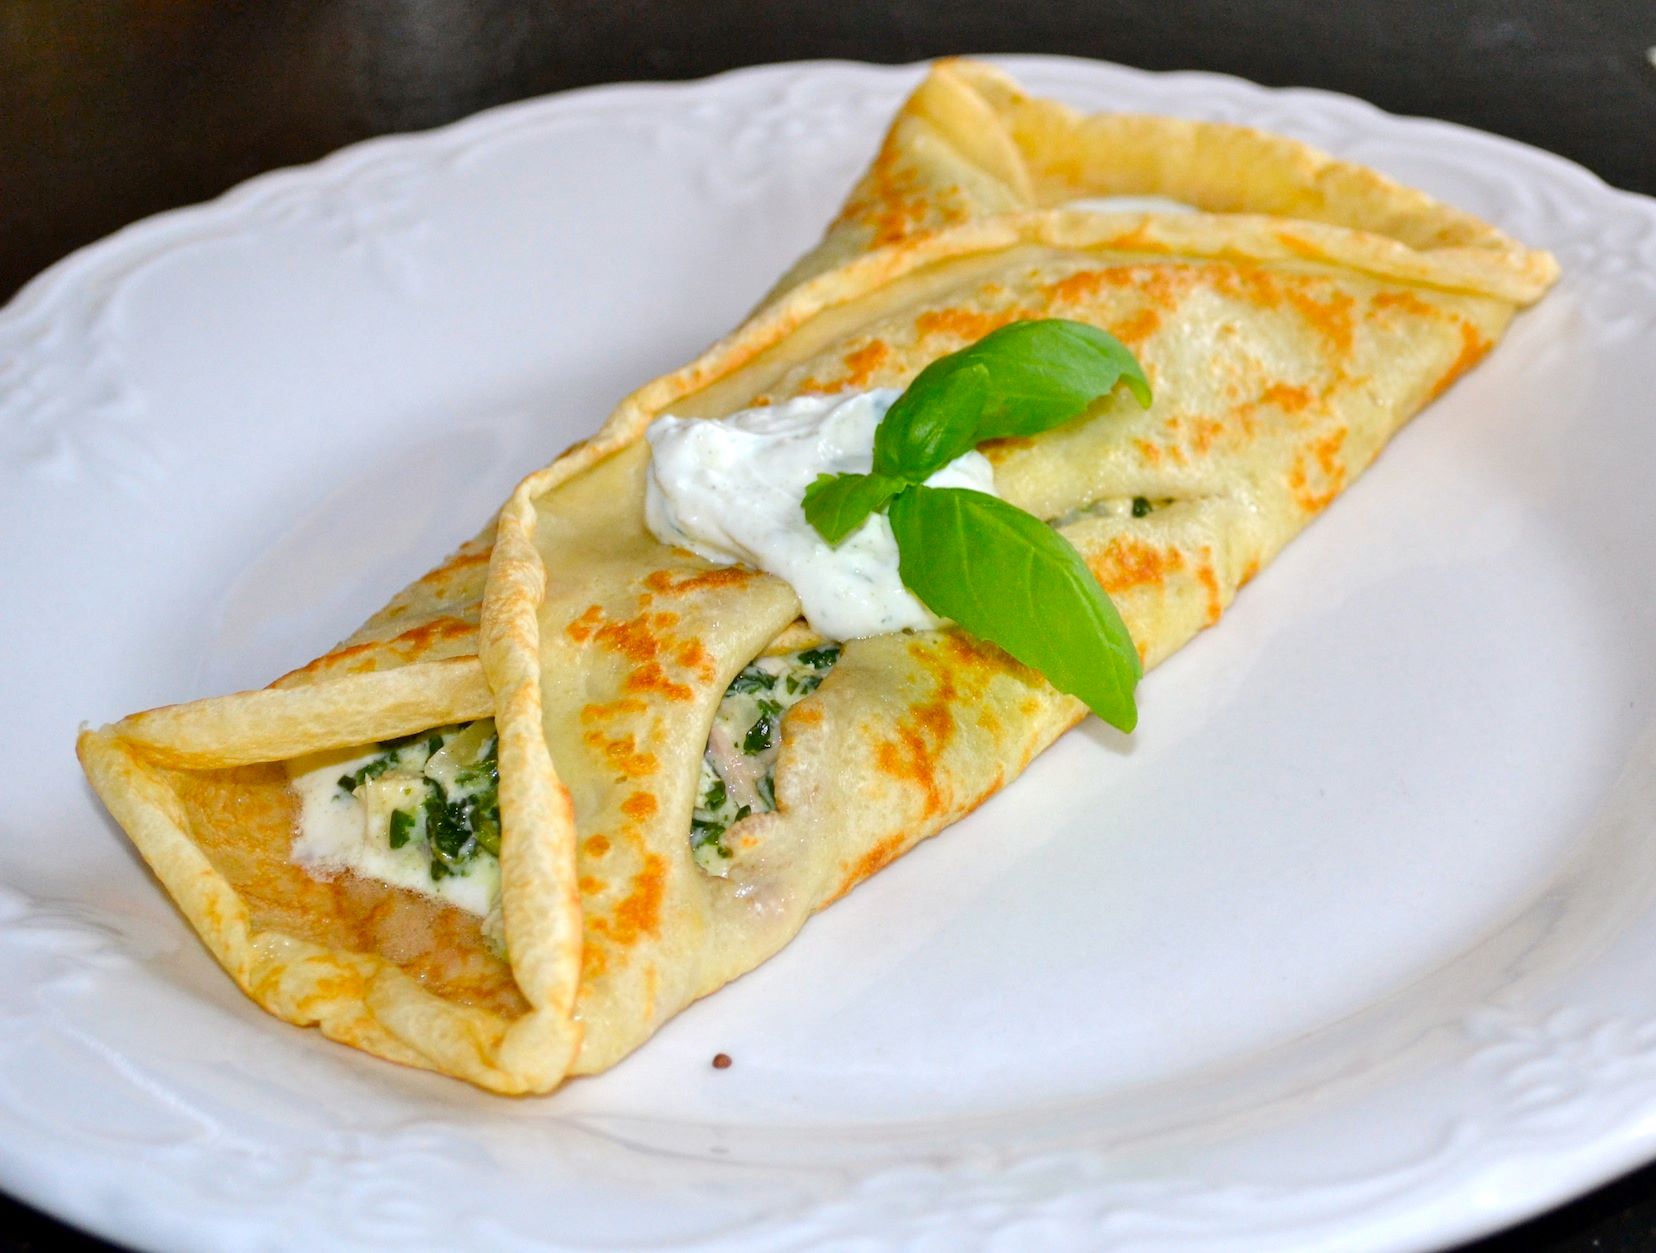 Chicken Normandy Crepe With Spinach: A Delicious And Nutritious Dish